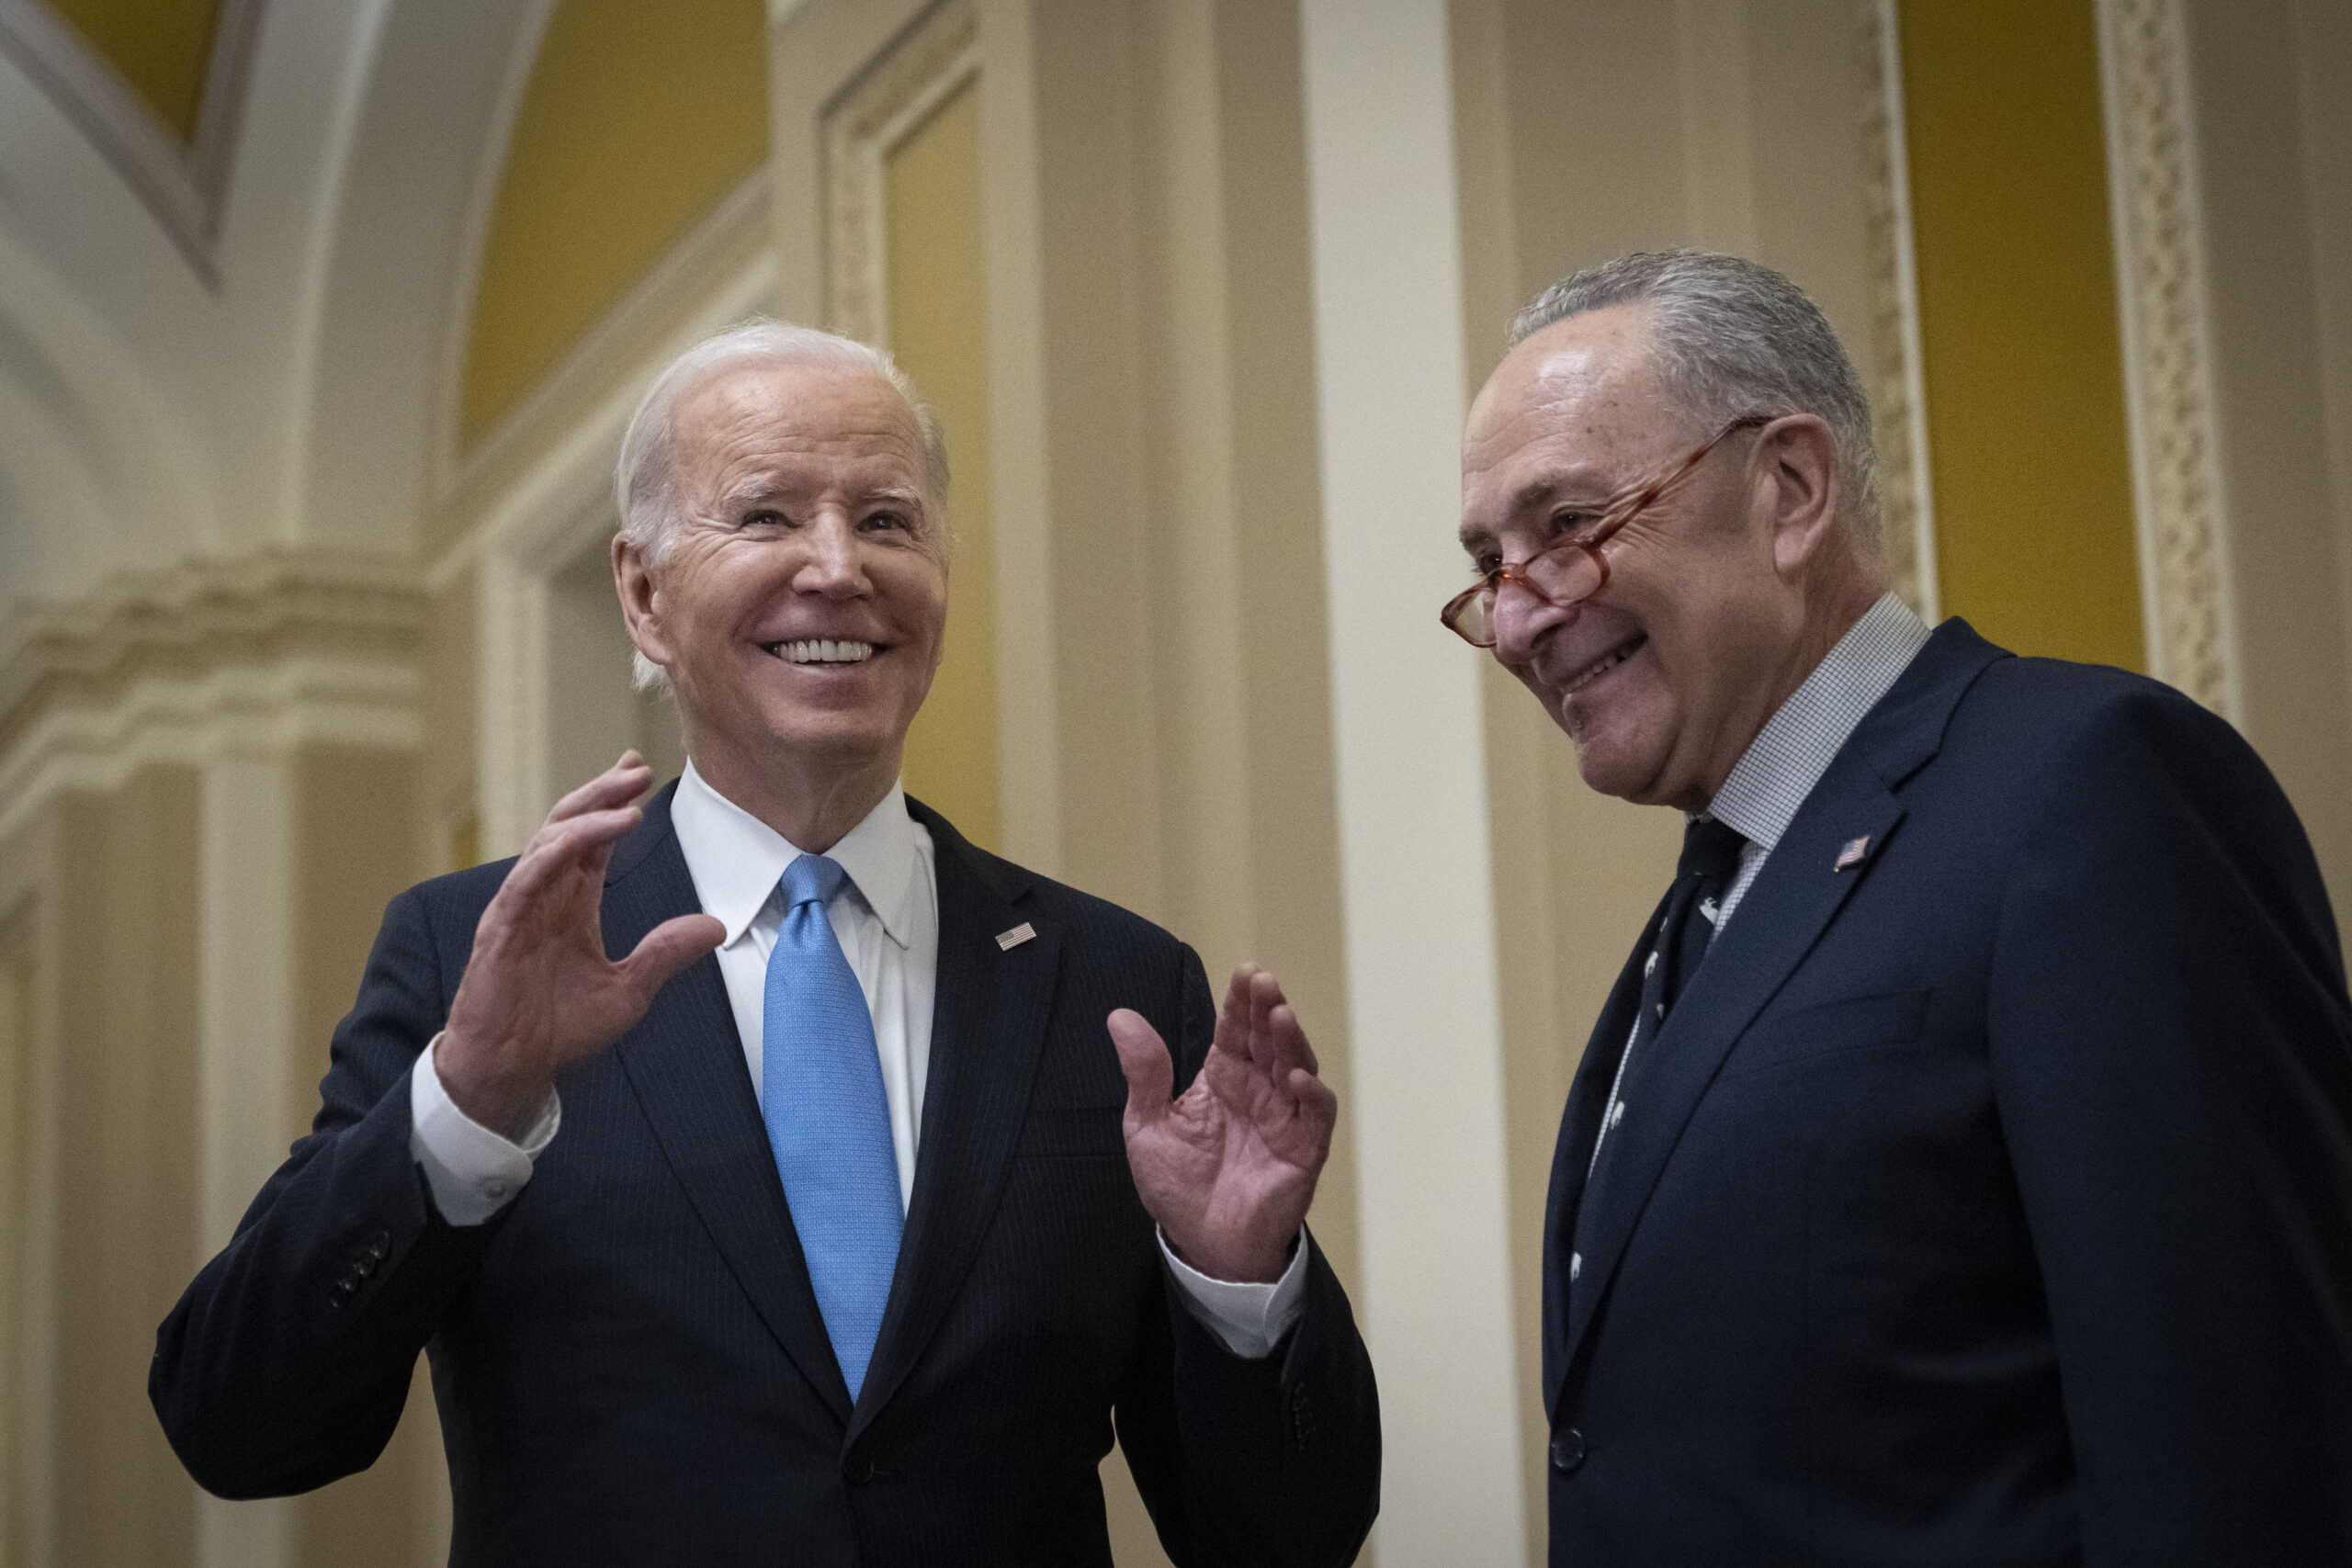 Biden And Schumer Took Money From Silicon Valley Bank Affiliates Before Company Imploded